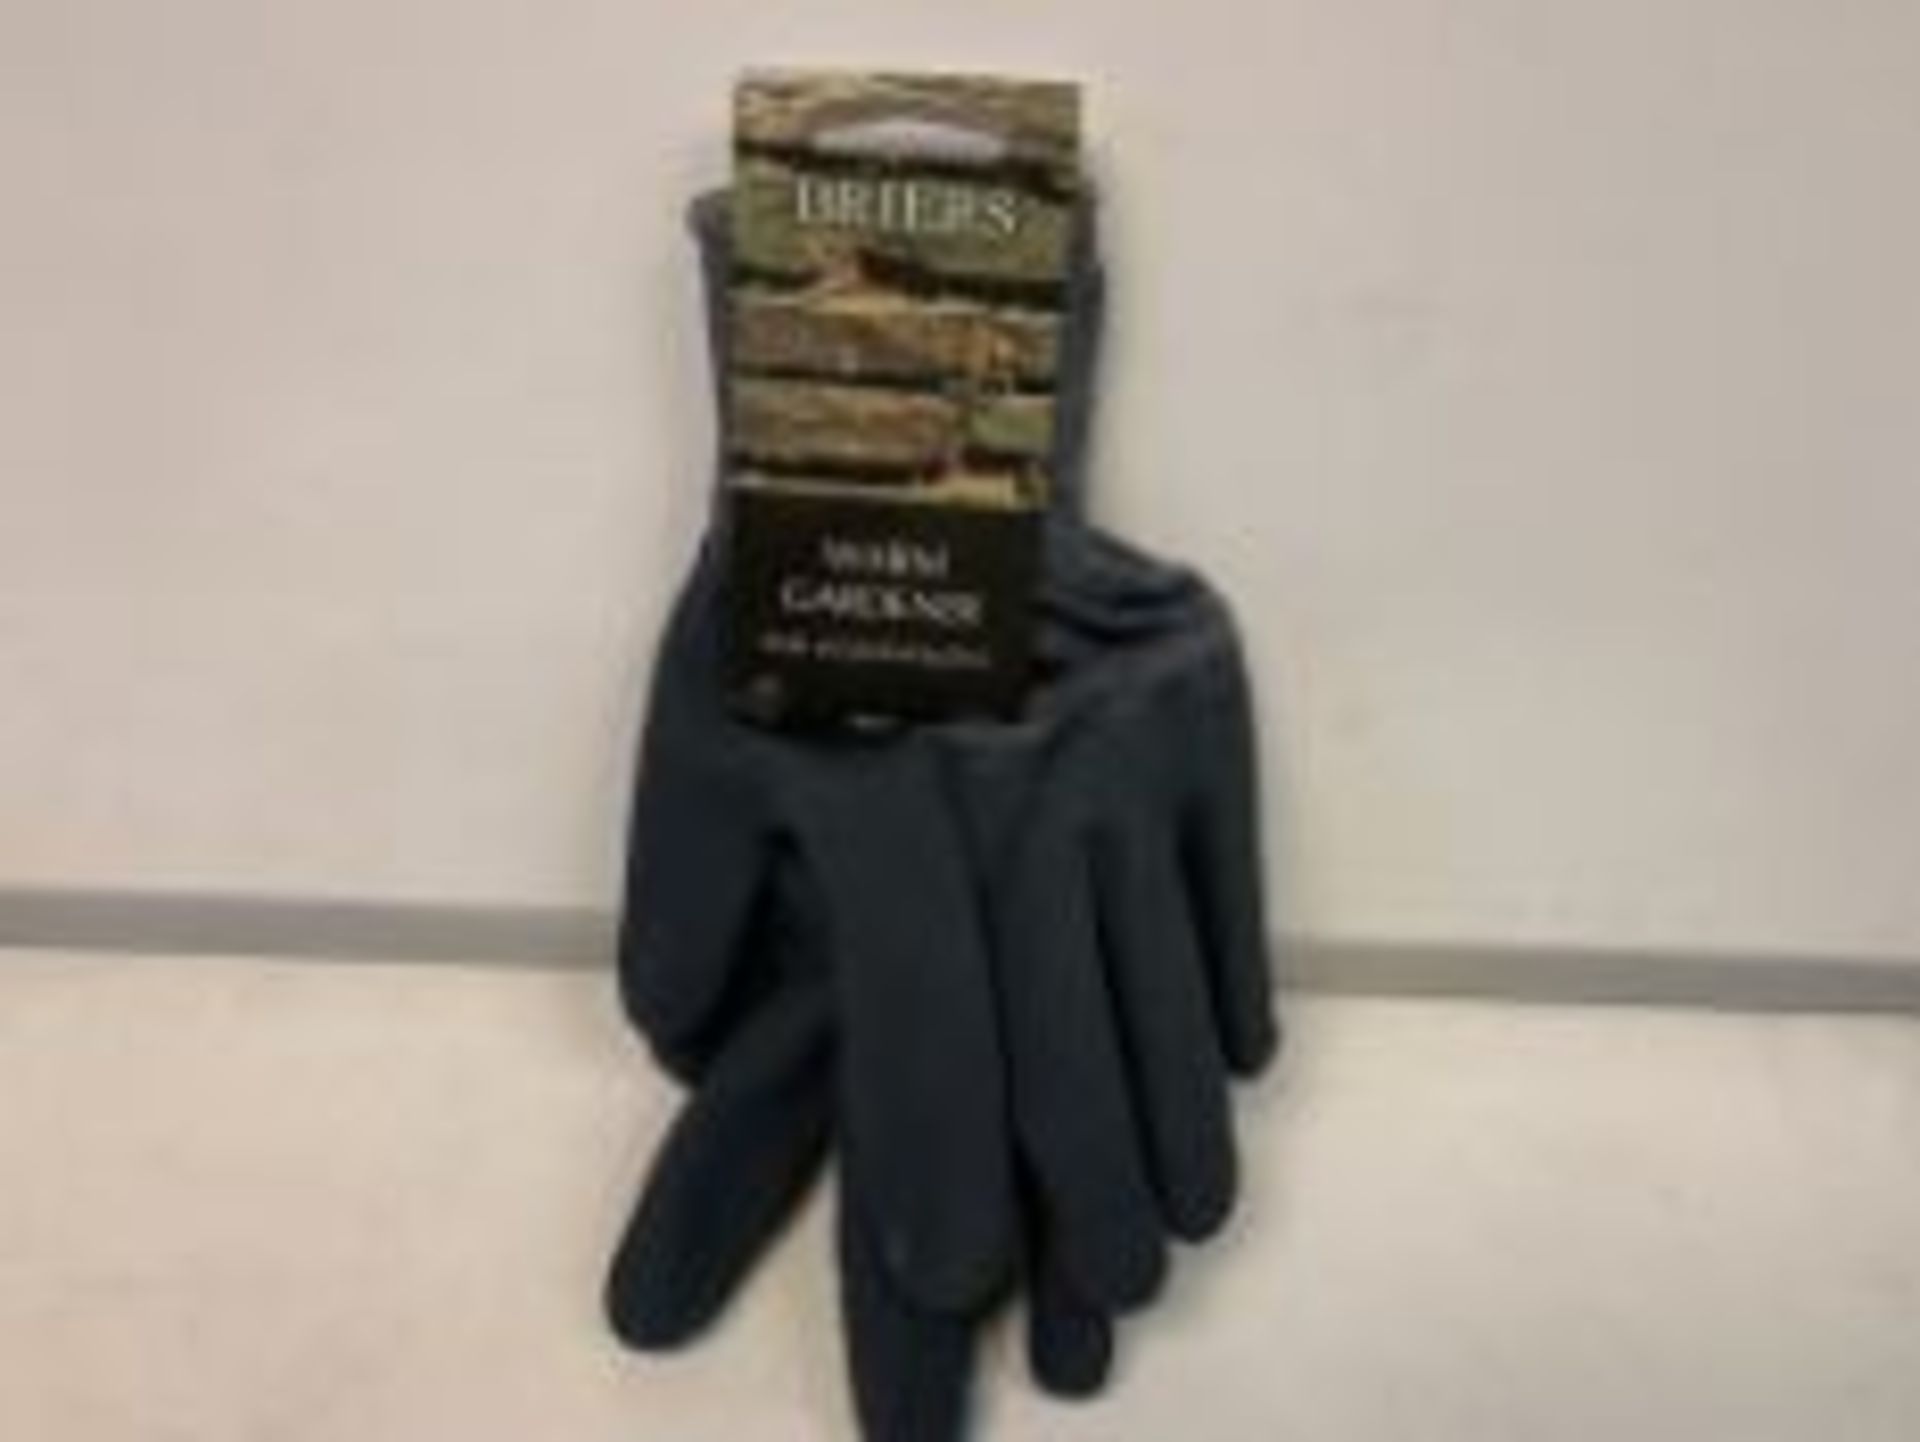 24 x NEW PACKAGED PAIRS OF BRIERS WARM GARDENER - MULTI USE GARDENING GLOVES - COLOURS MAY VARY